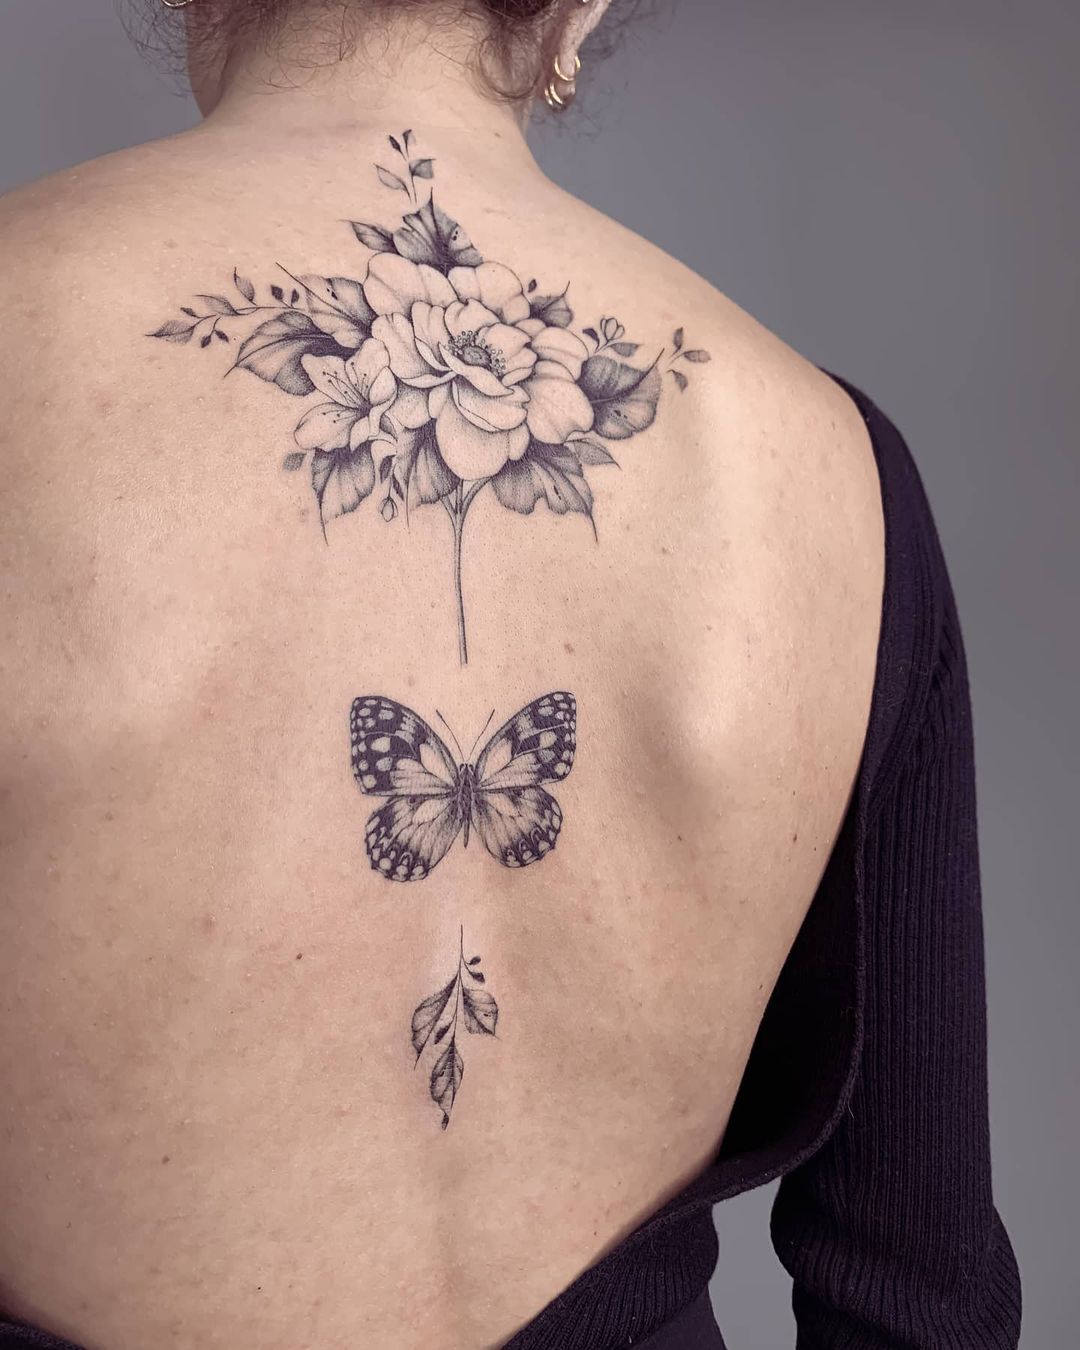 Share 76+ butterfly back tattoos best - in.cdgdbentre